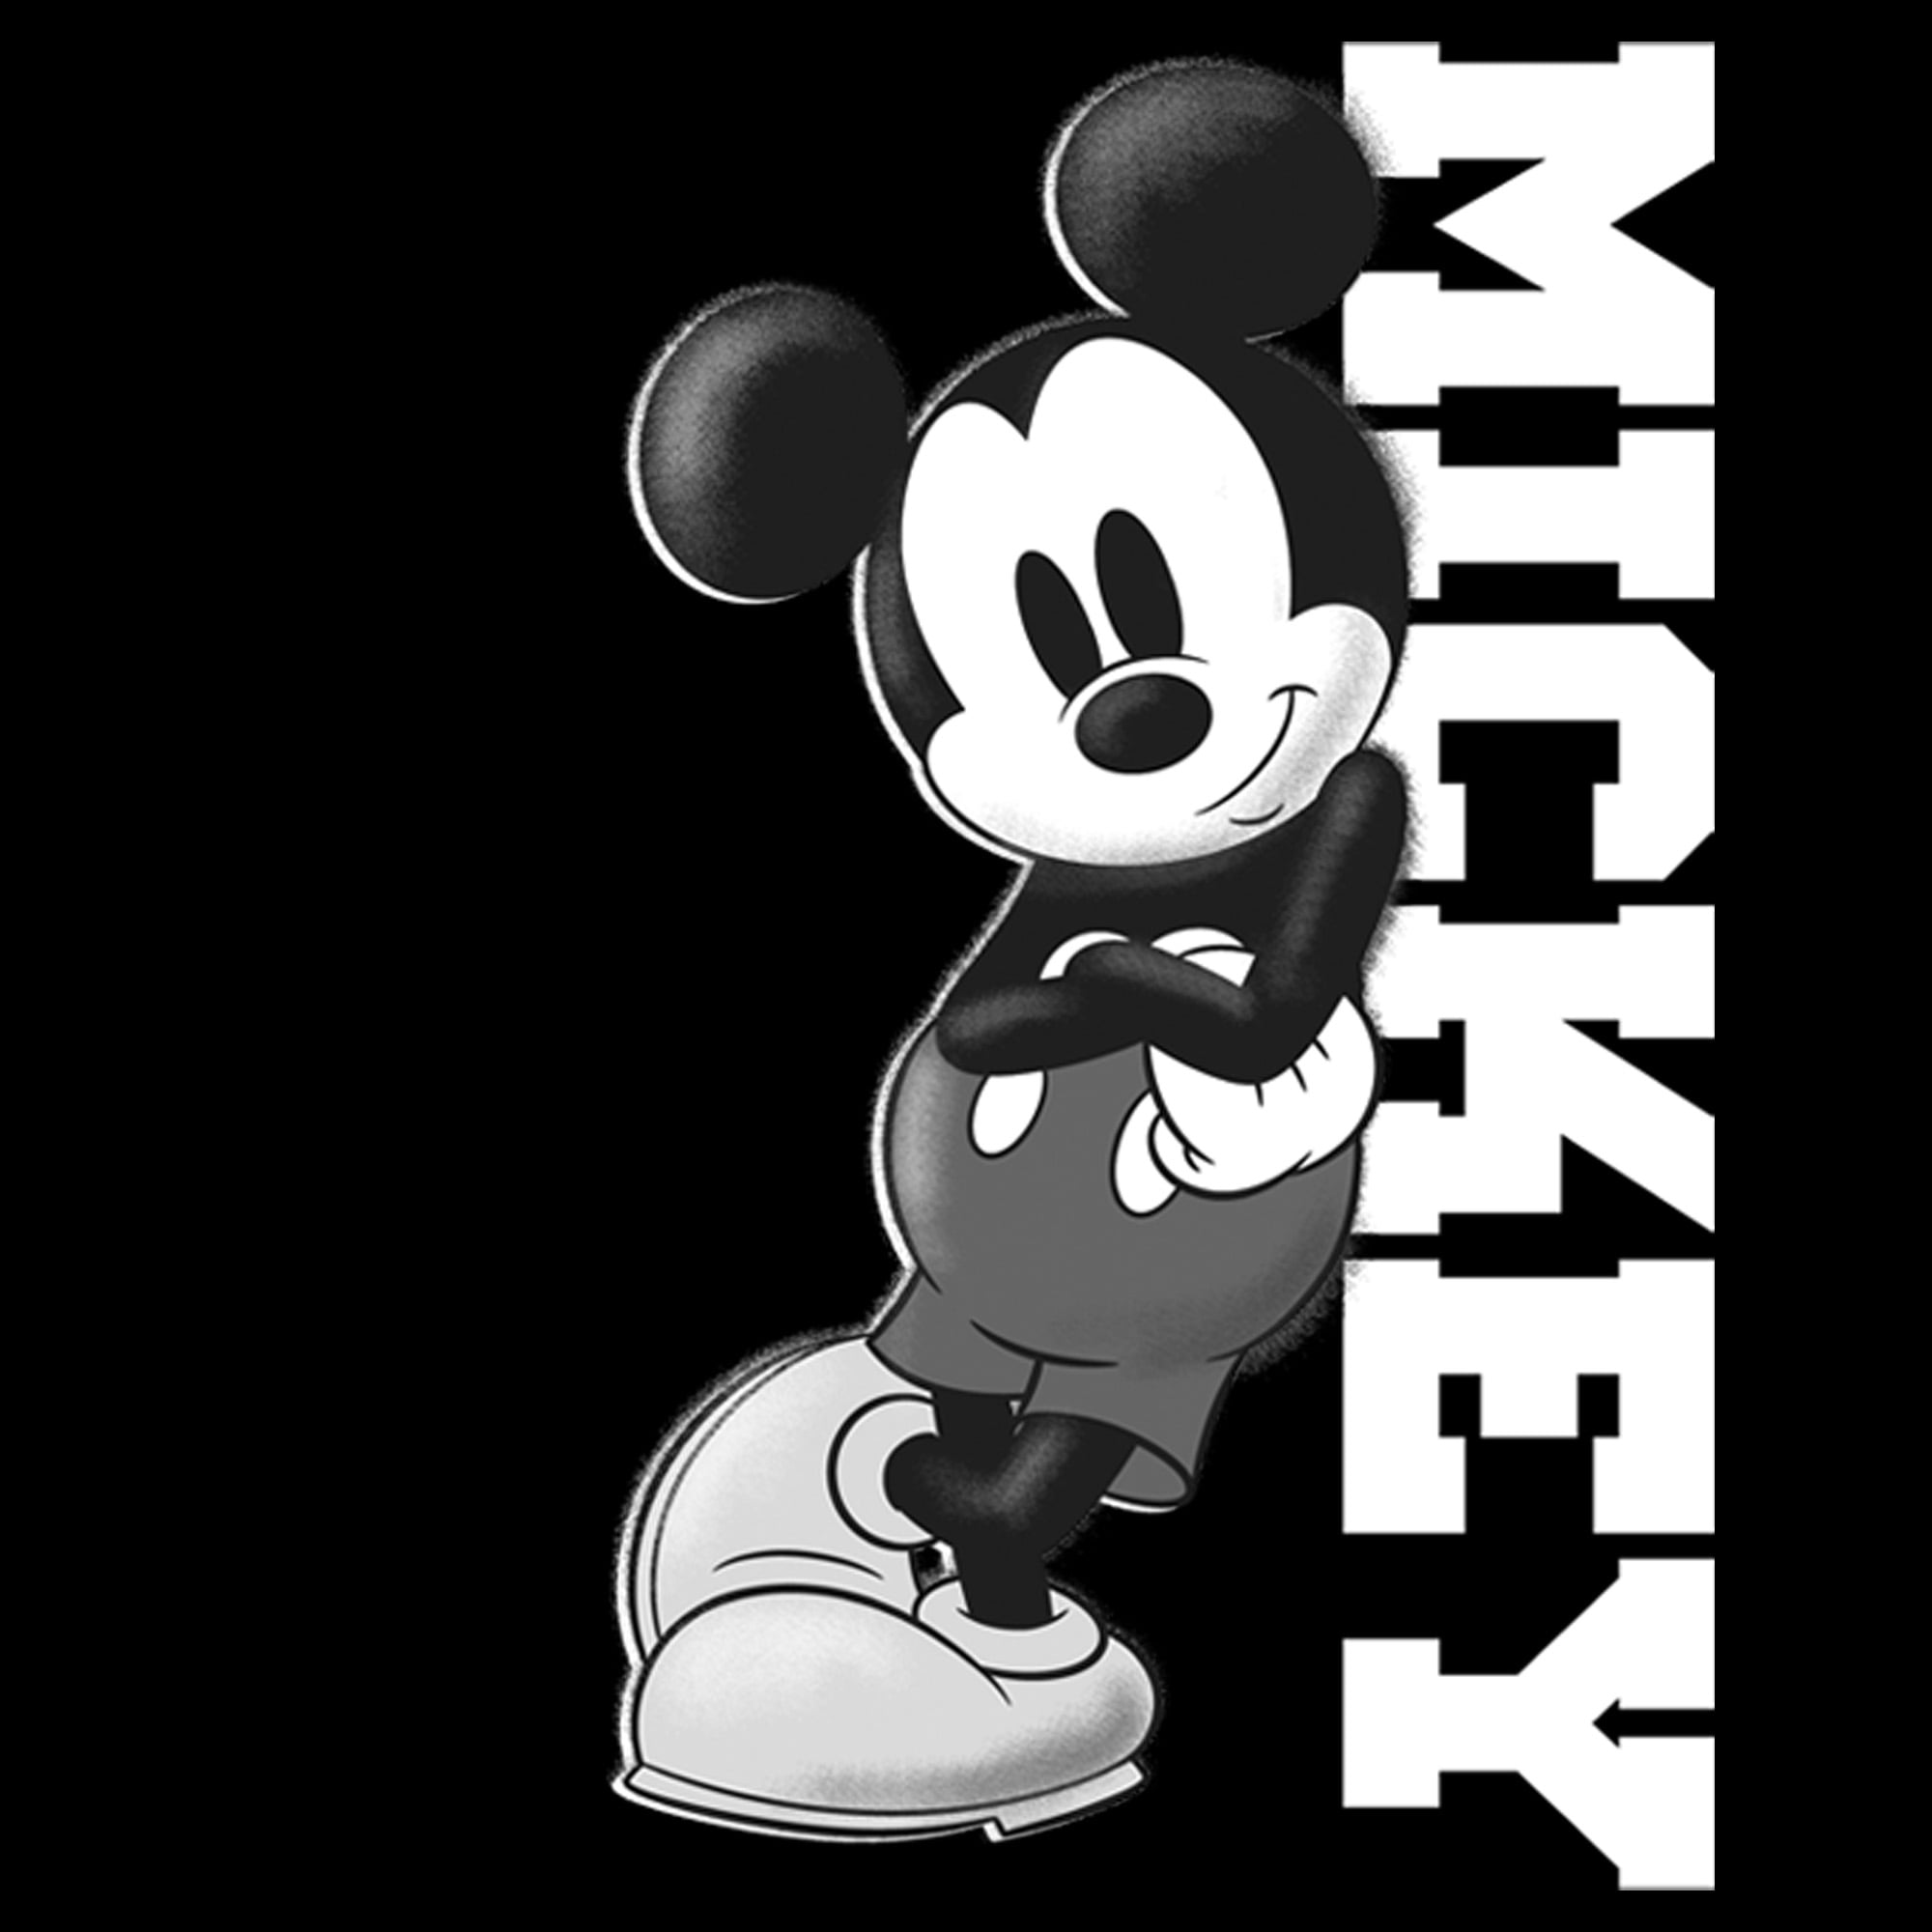  Mickey Mouse Hintergrundbild 2000x2000. Boy's Mickey & Friends Black and White Mickey Mouse Graphic Tee Black Small